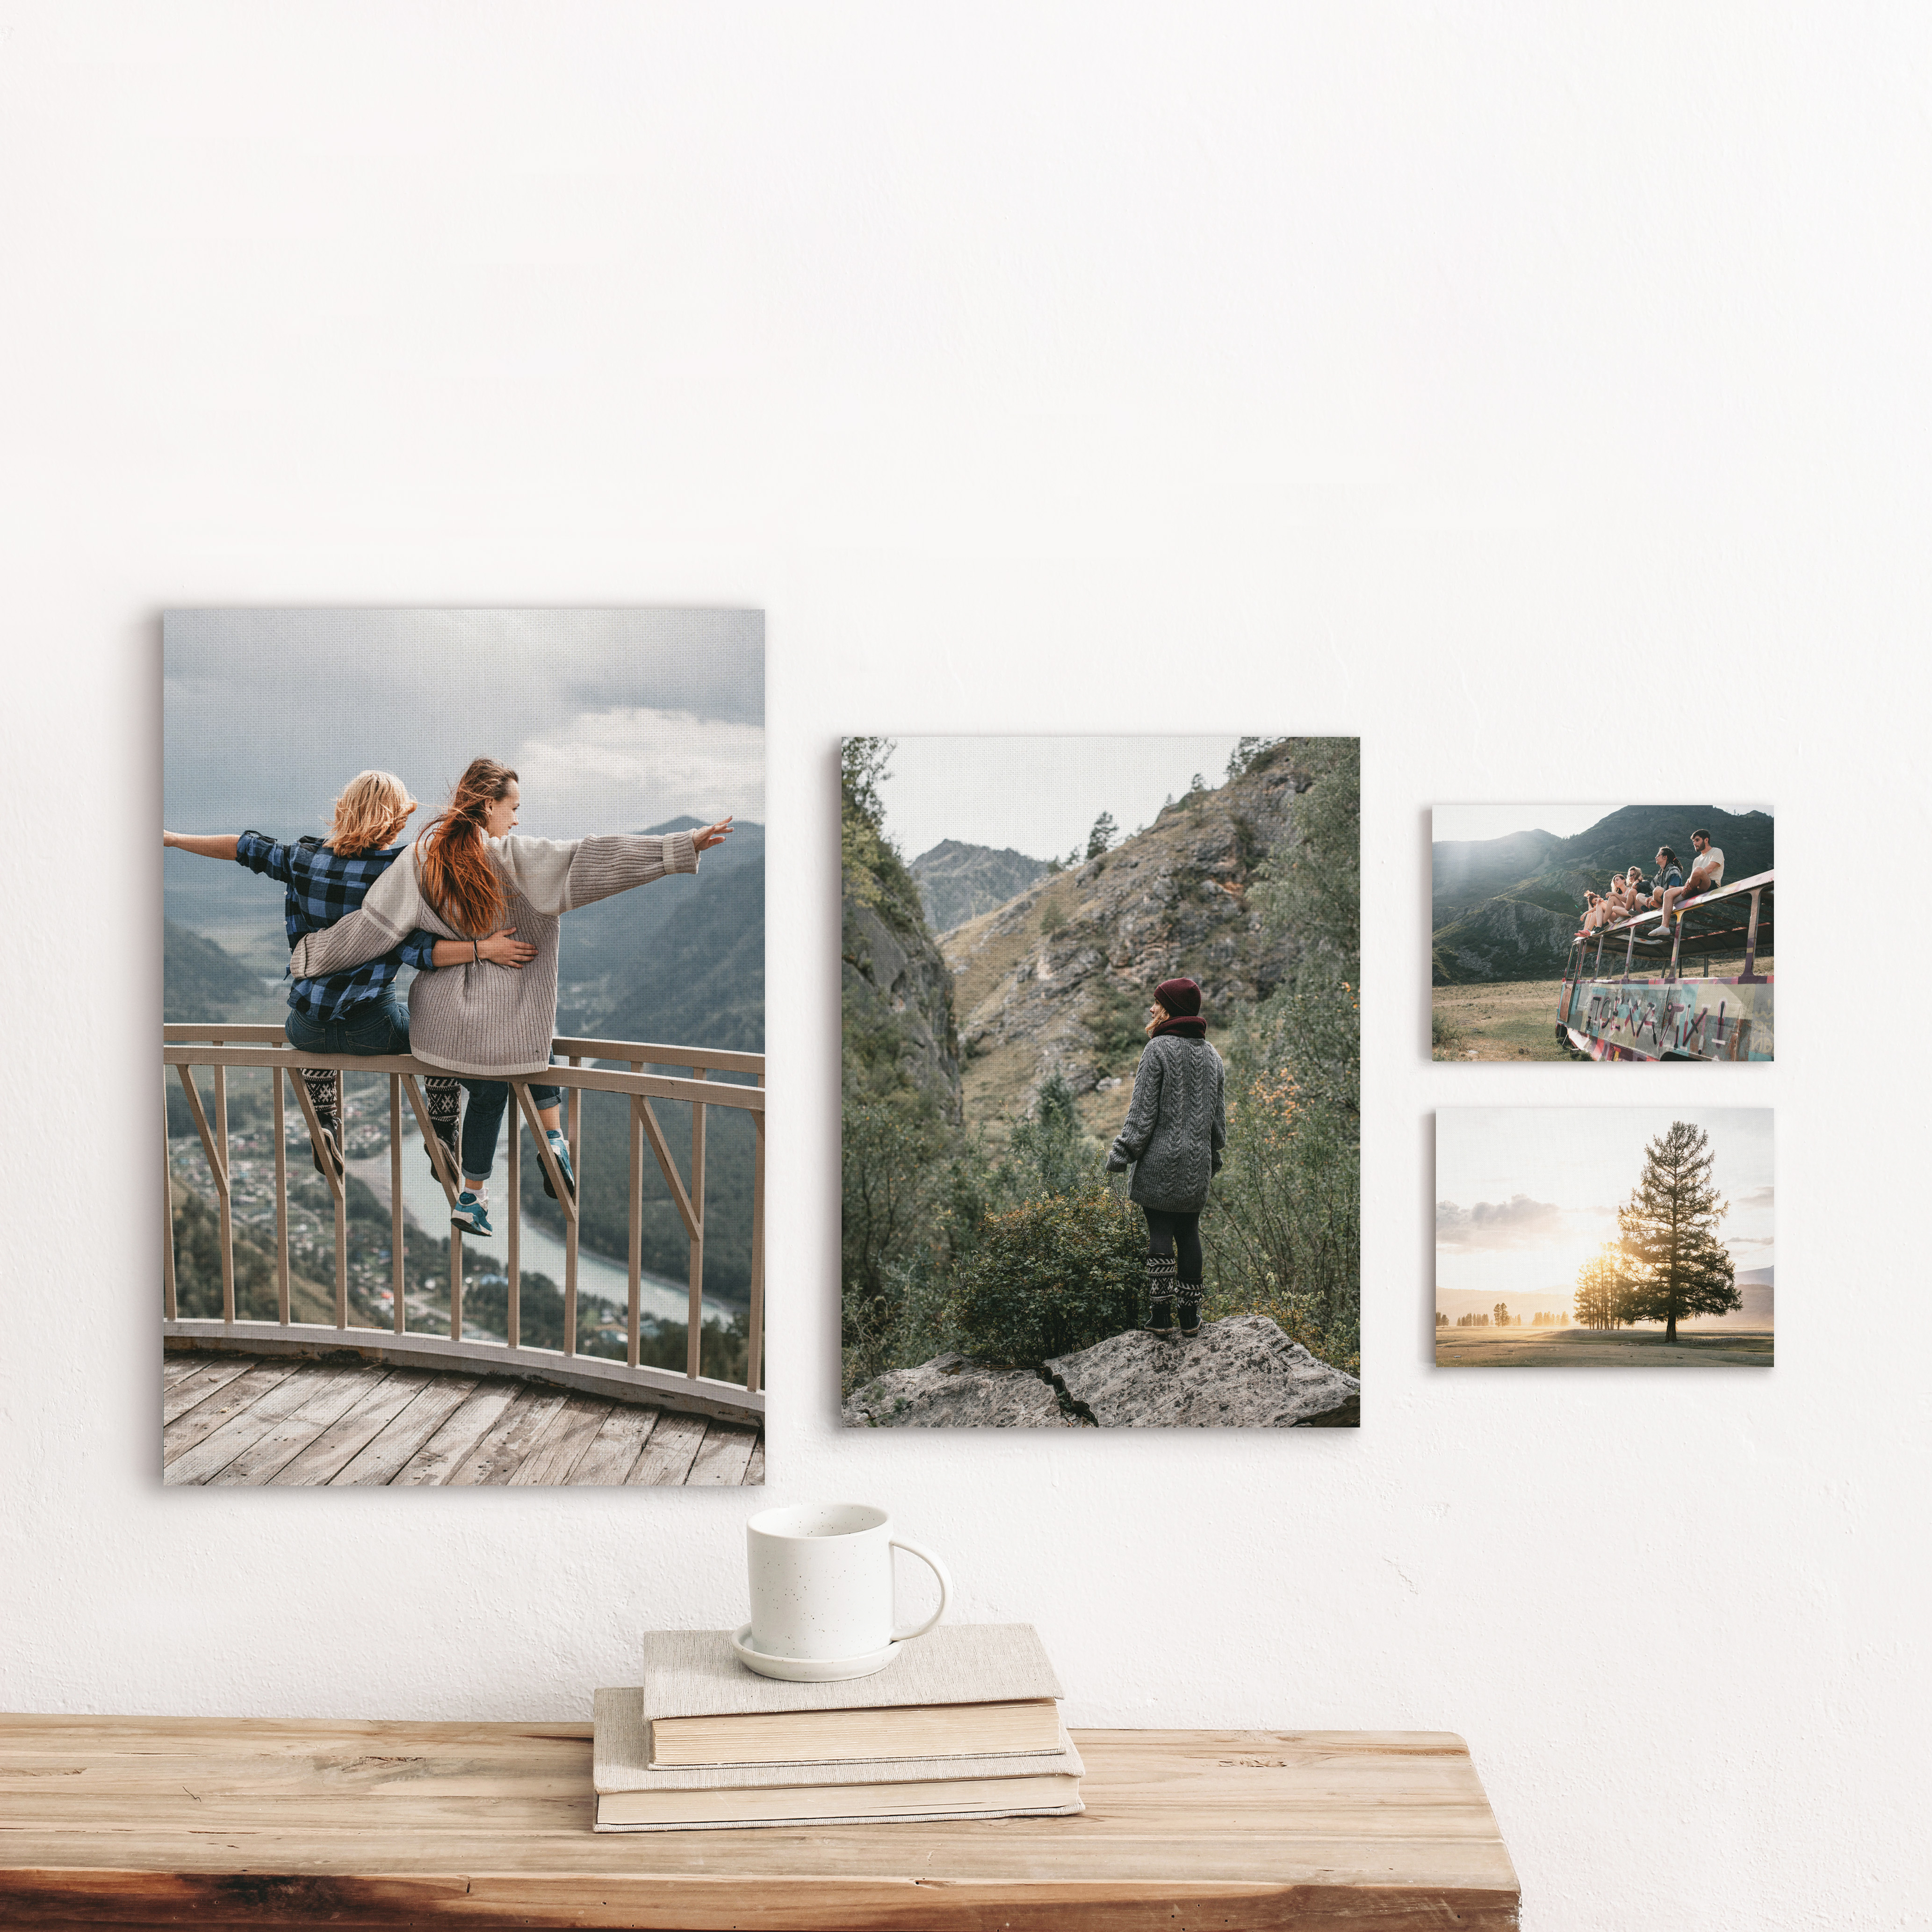 56% off our Best Selling Prints Bundle